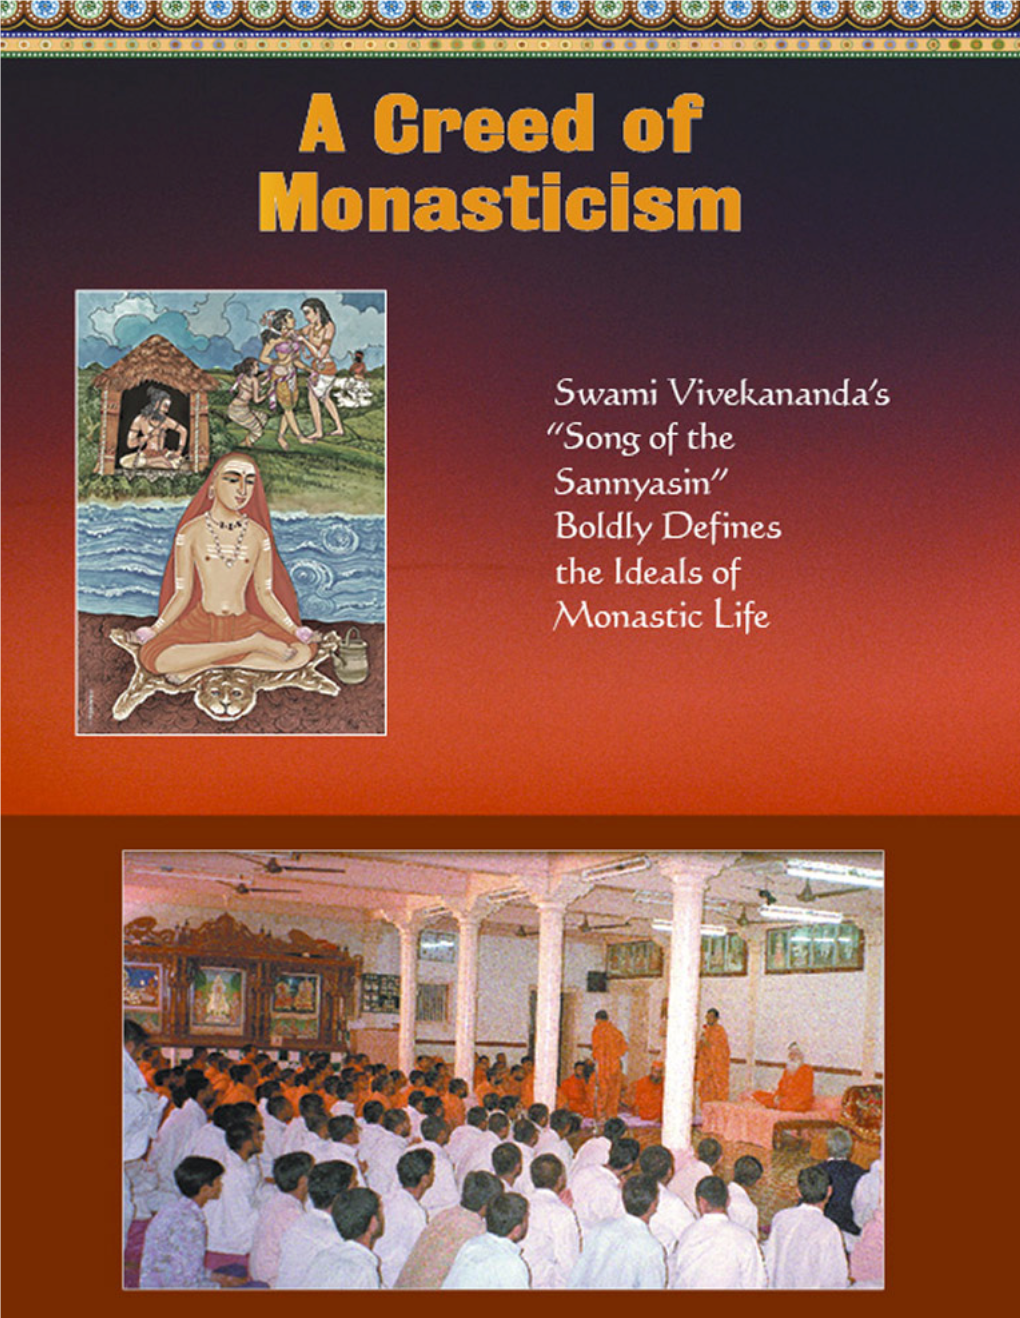 A Creed of Monasticism